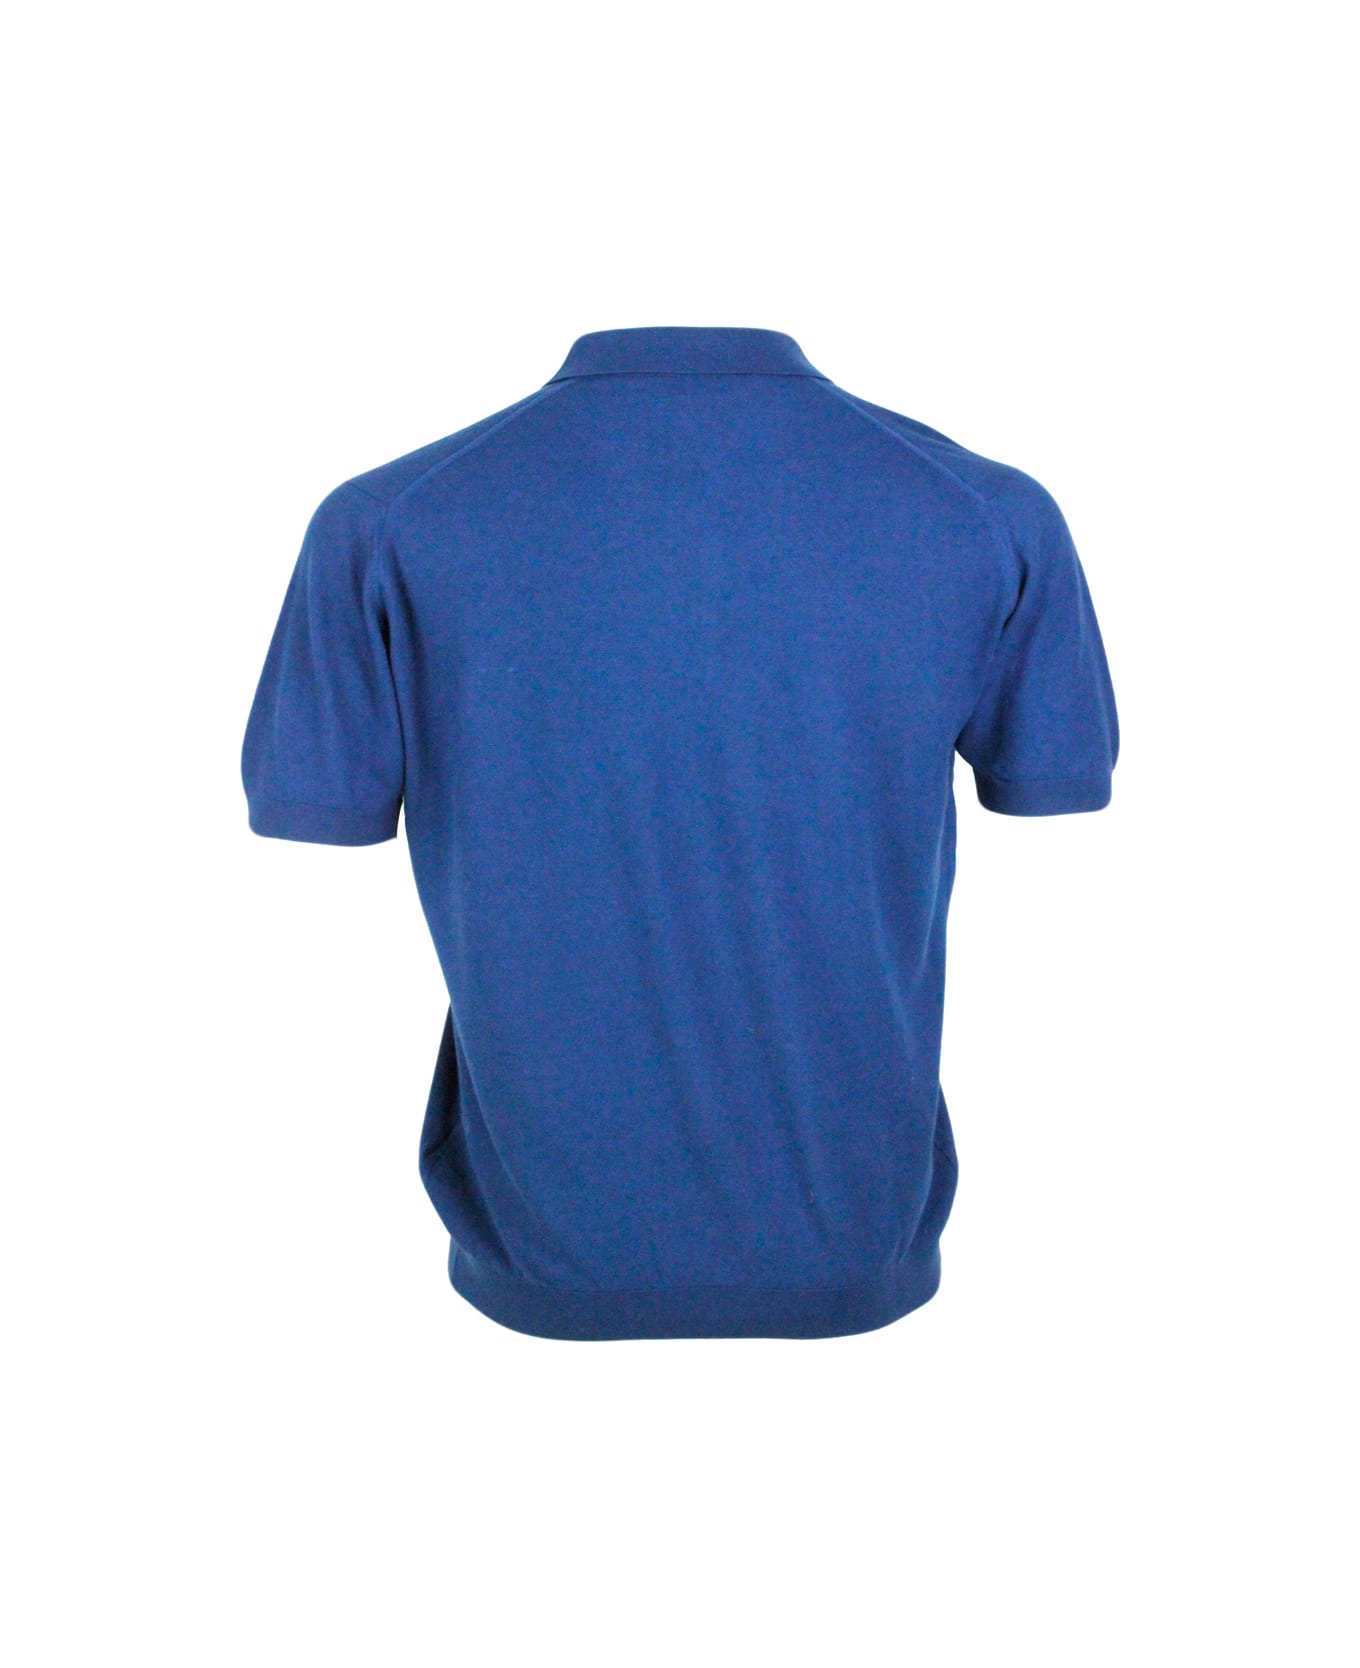 John Smedley Short-sleeved Polo Shirt In Extrafine Piqué Cotton Thread With Three Buttons - Blu clear